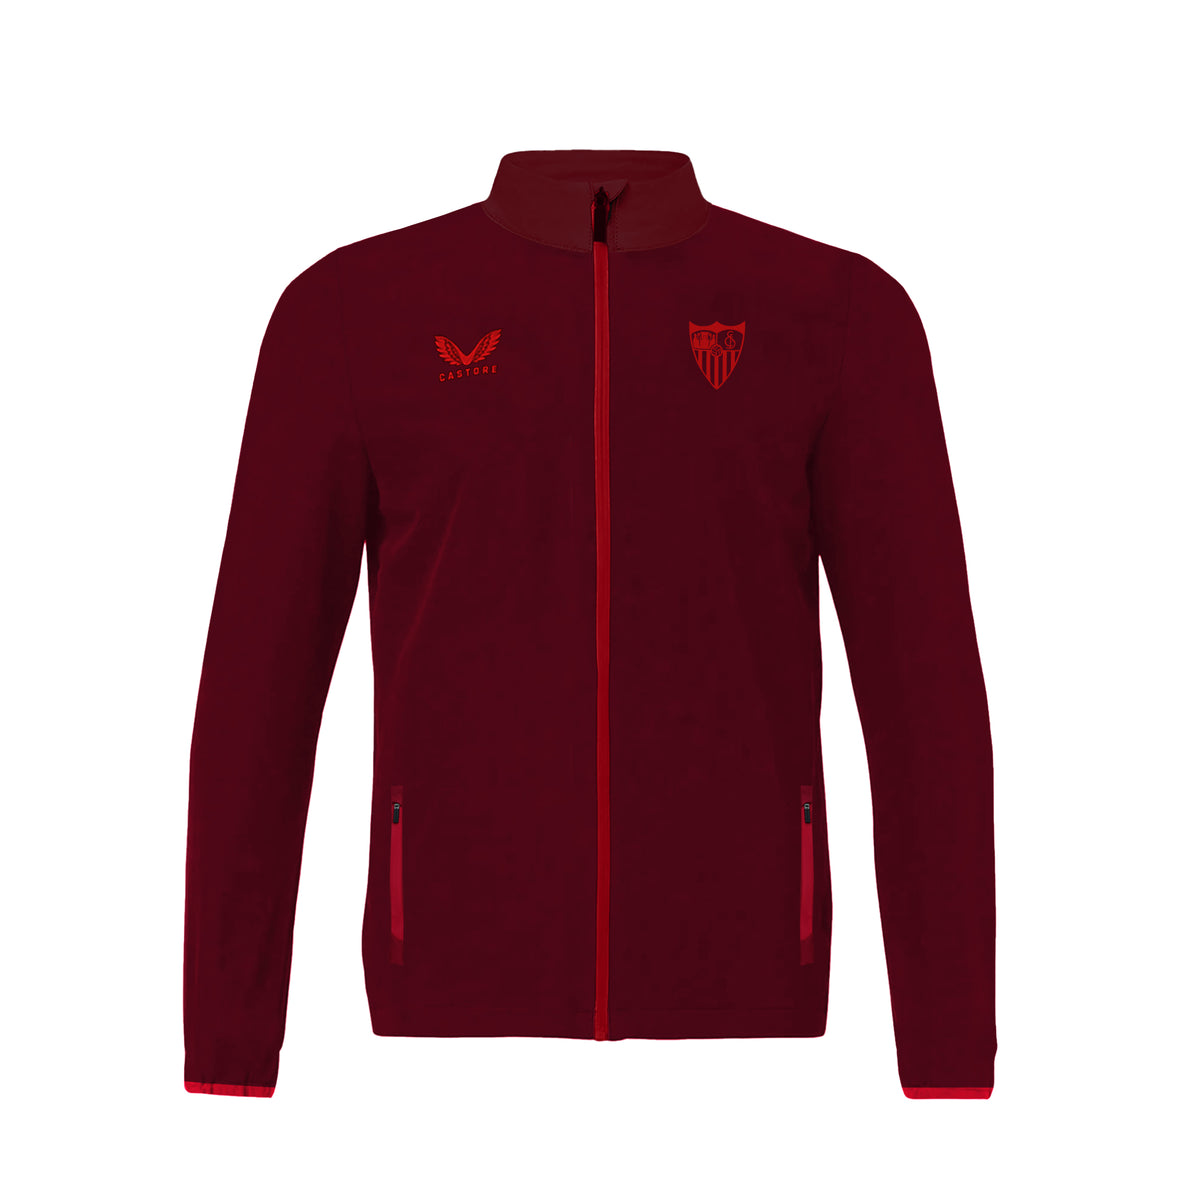 Kids red tracksuit top 23/24